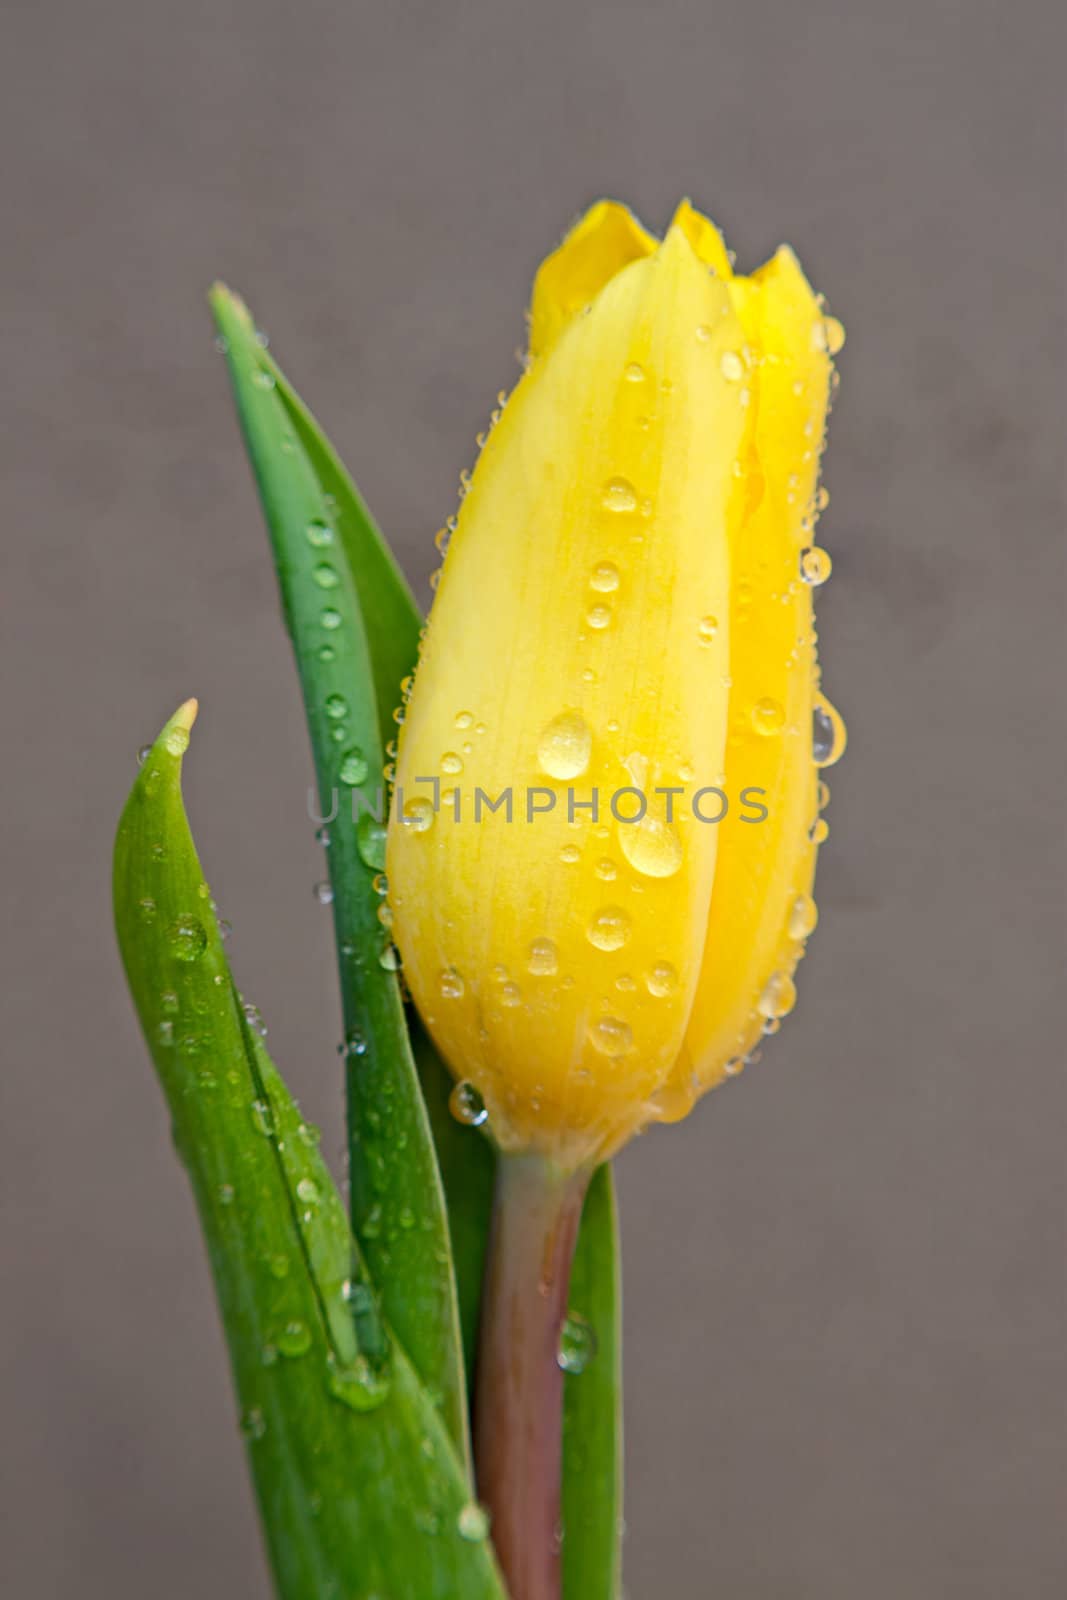 Beautiful yellow   tulip  with drops of water close-up.Image with shallow depth of field.